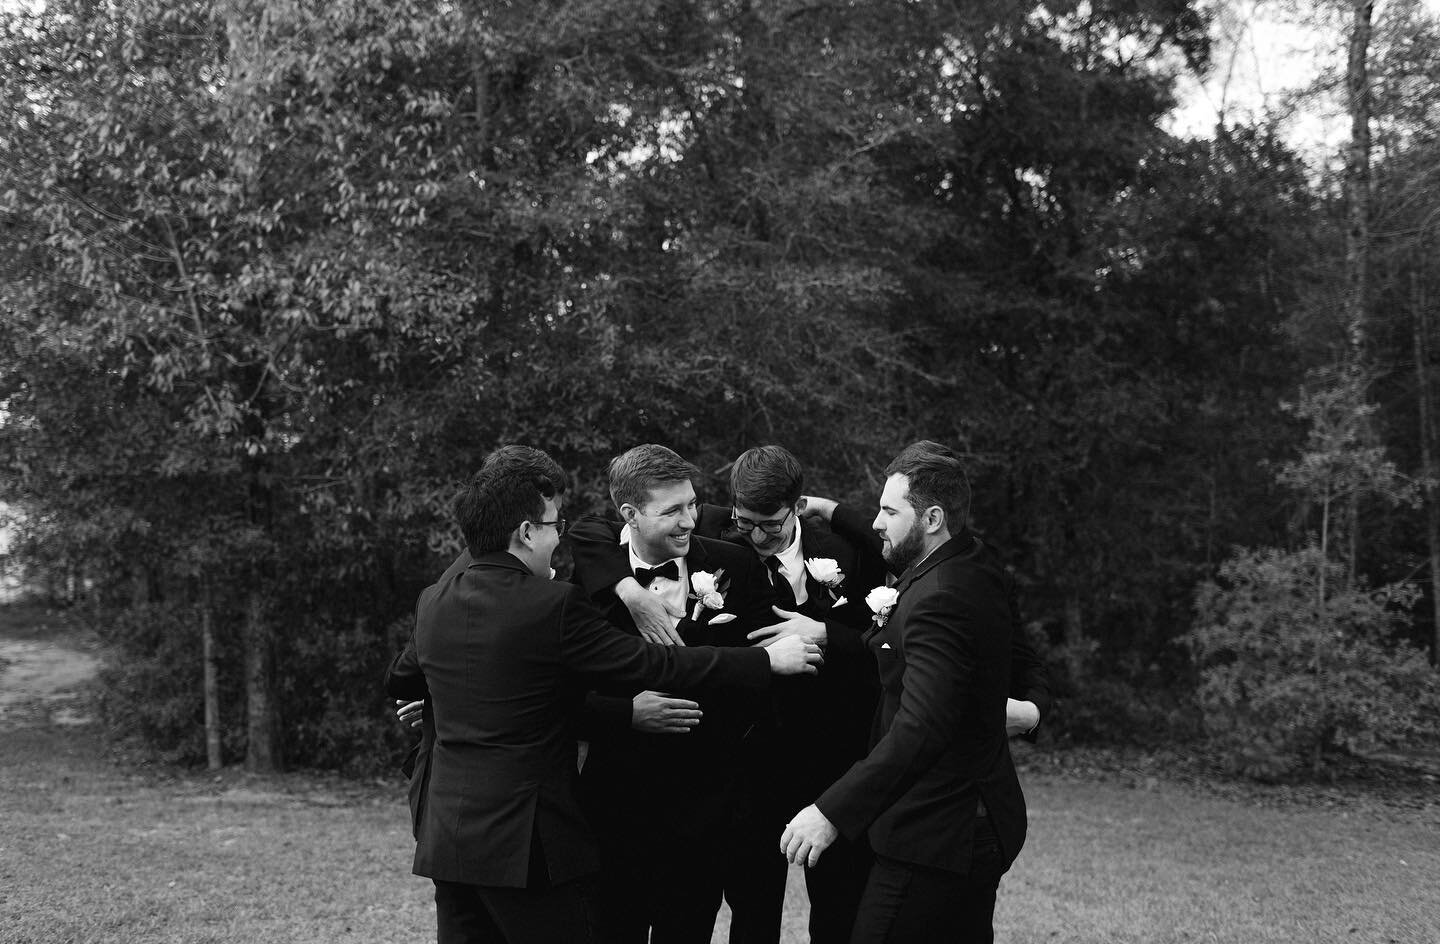 The people you have by your side can make such a big impact on your wedding day. Surround yourself with those who make you laugh a little louder and smile a little brighter. 🤍

Coordination: @kaitlynmarieevents
Venue: @granvilleplantation
Photograph